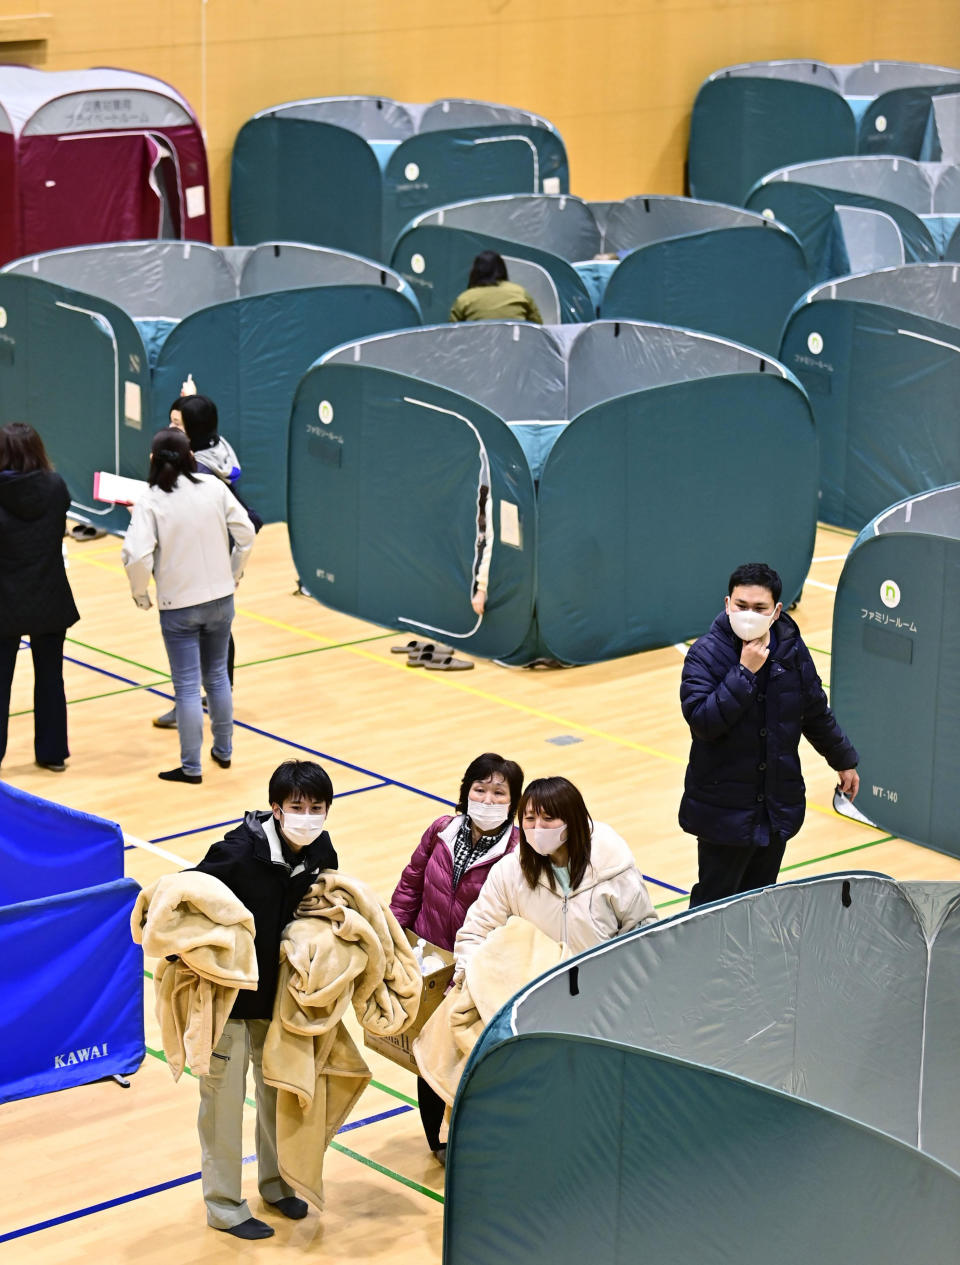 Evacuees shelter at a gym as an earthquake hit the area, in Soma, Fukushima prefecture, northeastern Japan, Sunday, Feb. 14, 2021. A strong earthquake hit off the coast of northeastern Japan late Saturday, shaking Fukushima, Miyagi and other areas, but there was no threat of a tsunami, officials said.(Kyodo News via AP)